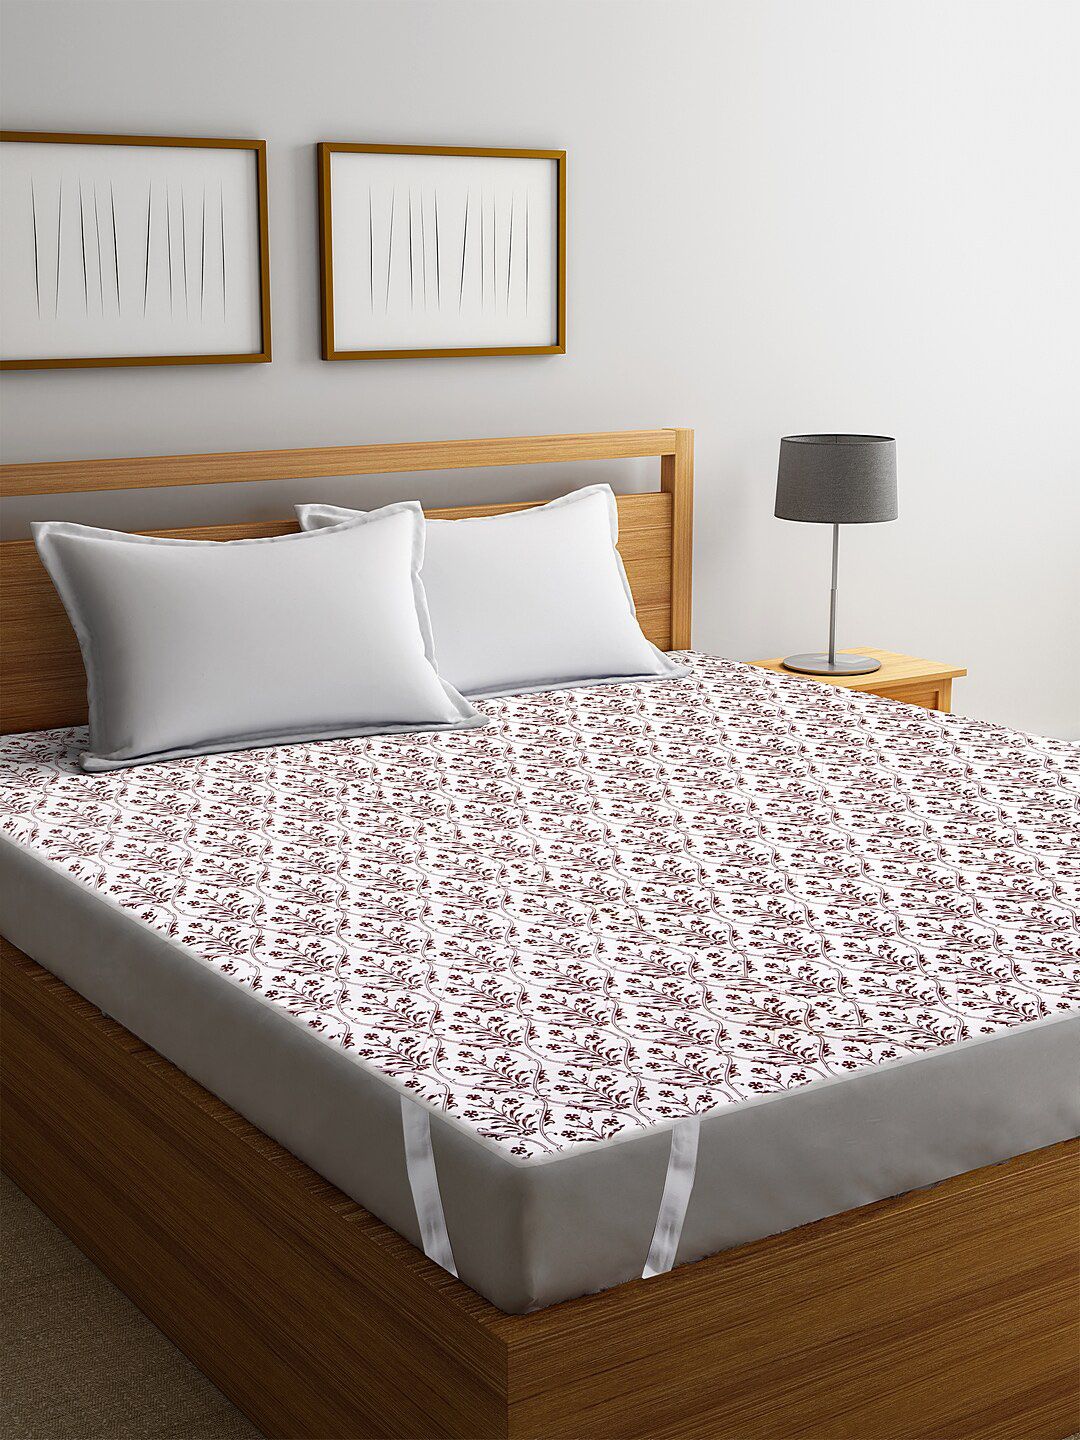 Rajasthan Decor White Screen Print Quilted Double Bed Mattress Protector Price in India